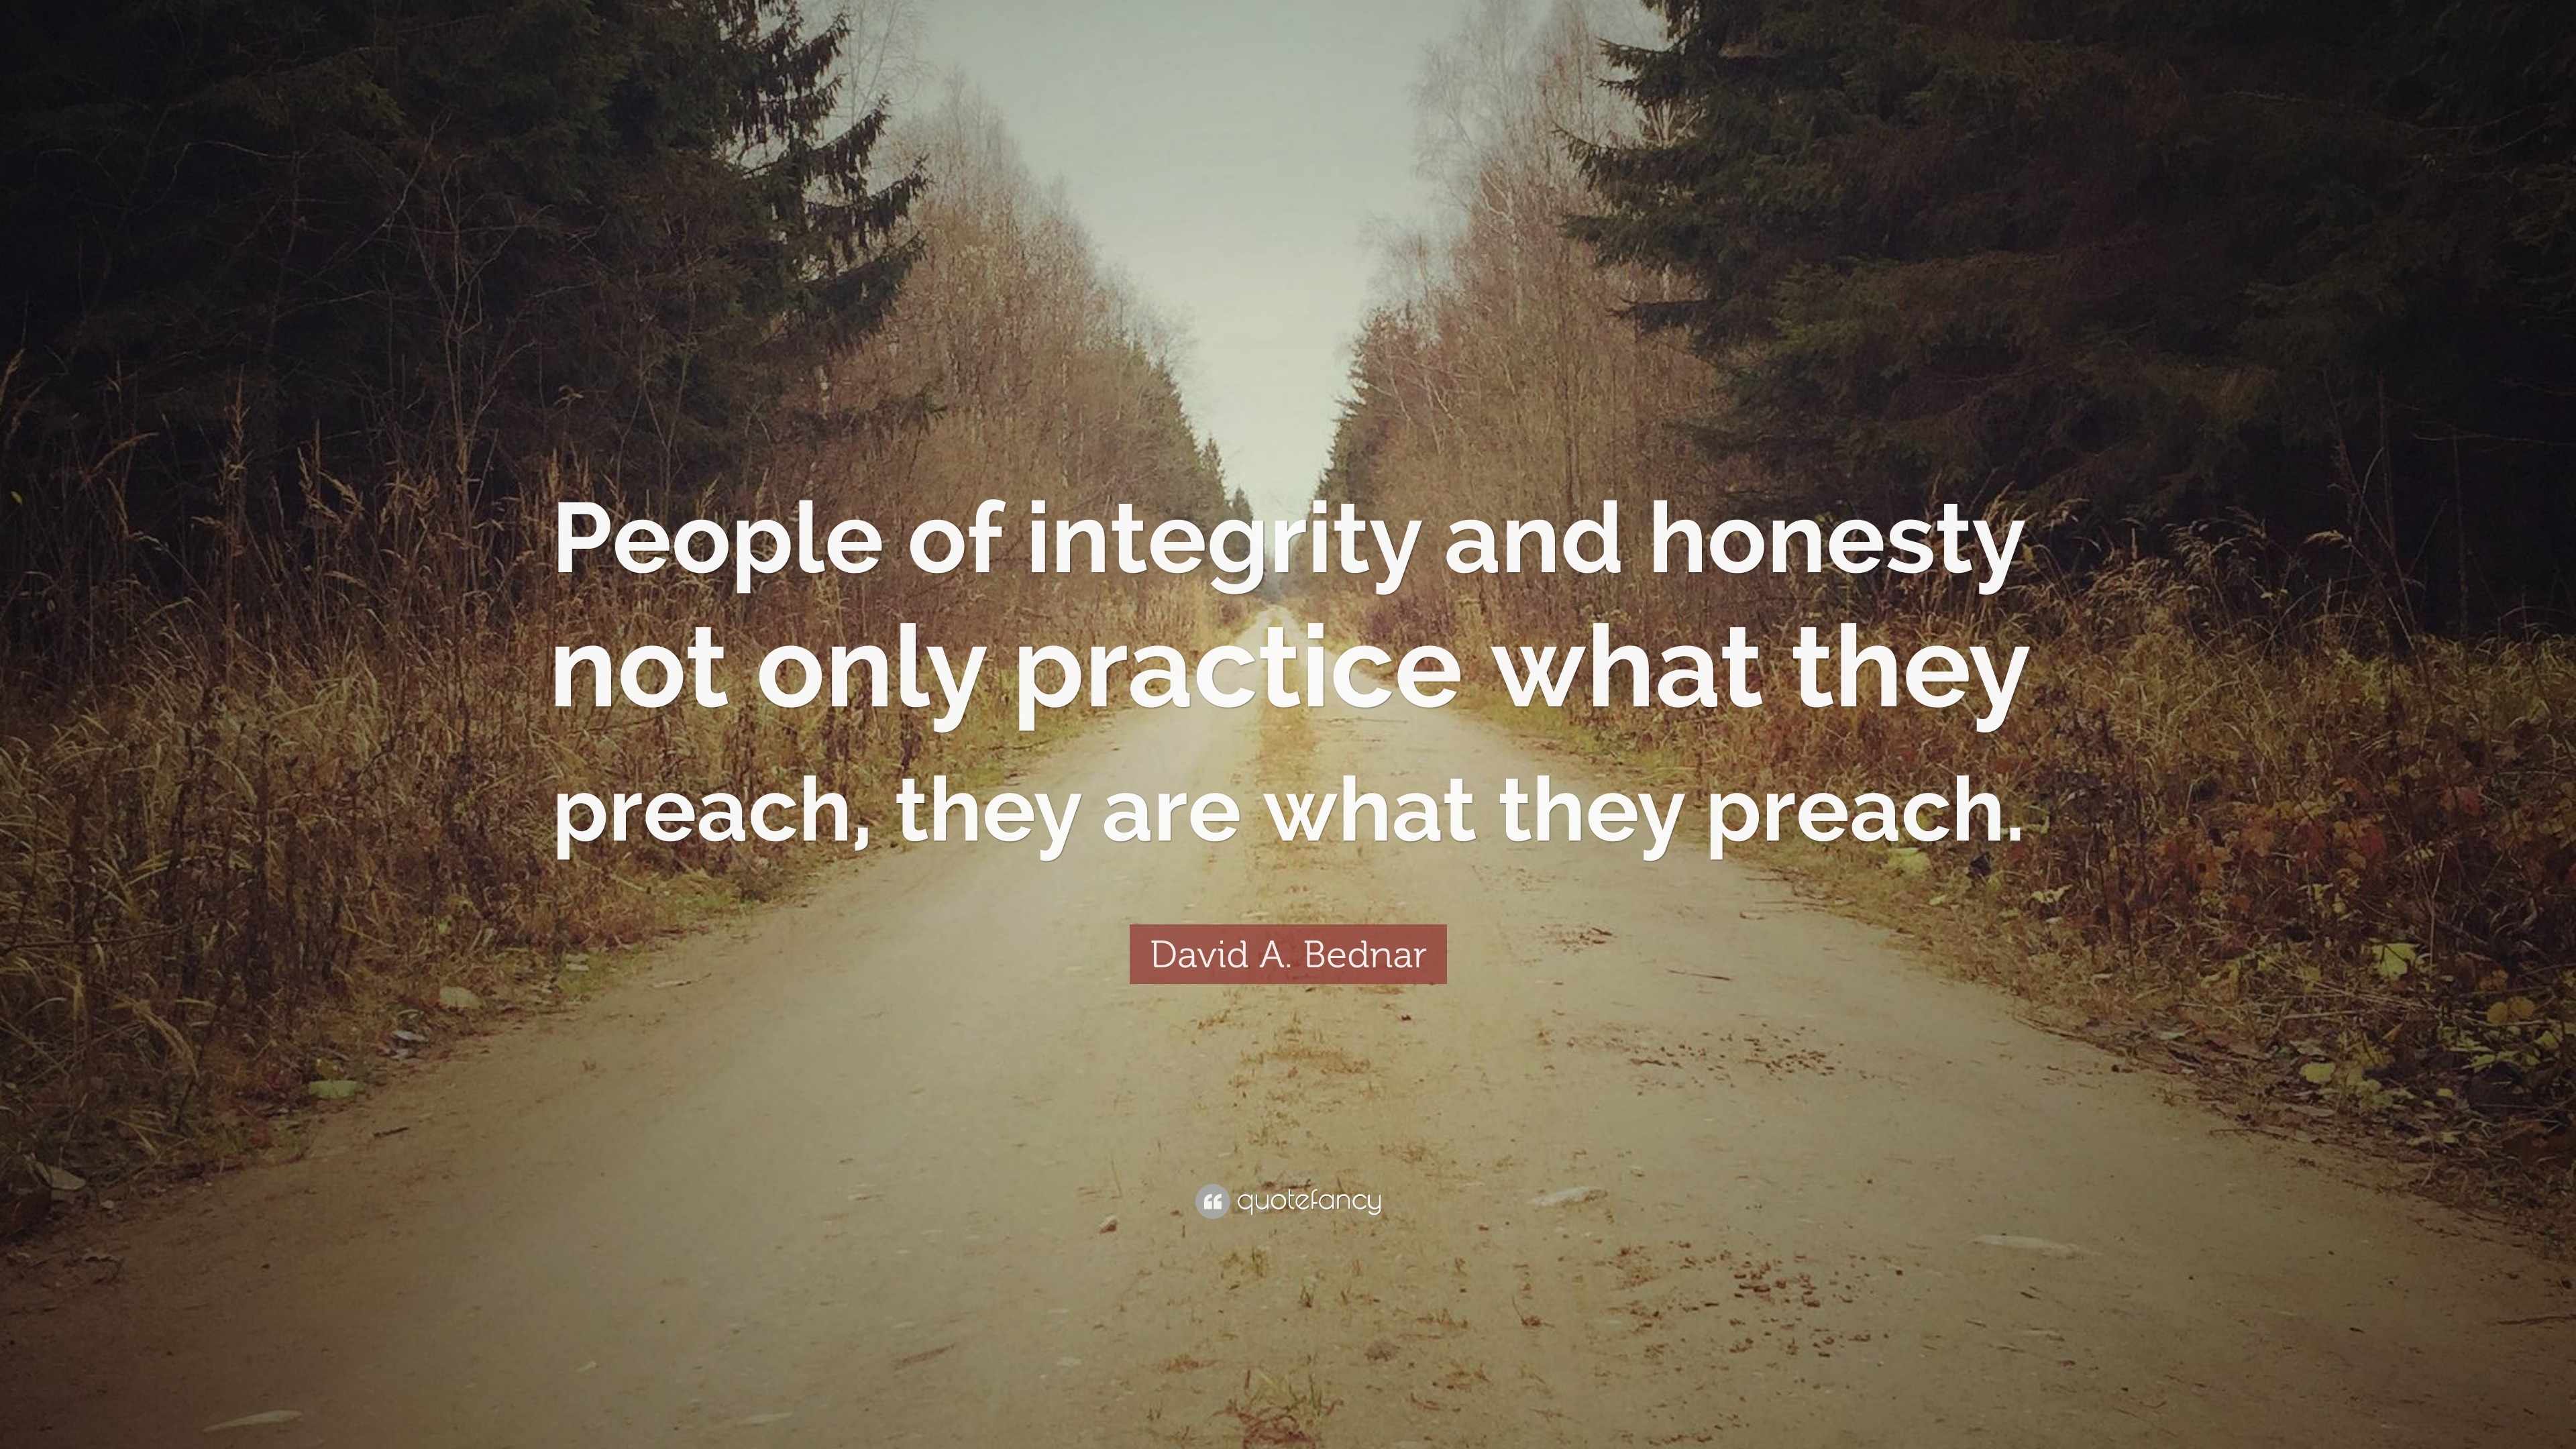 David A. Bednar Quote: “People of integrity and honesty not only